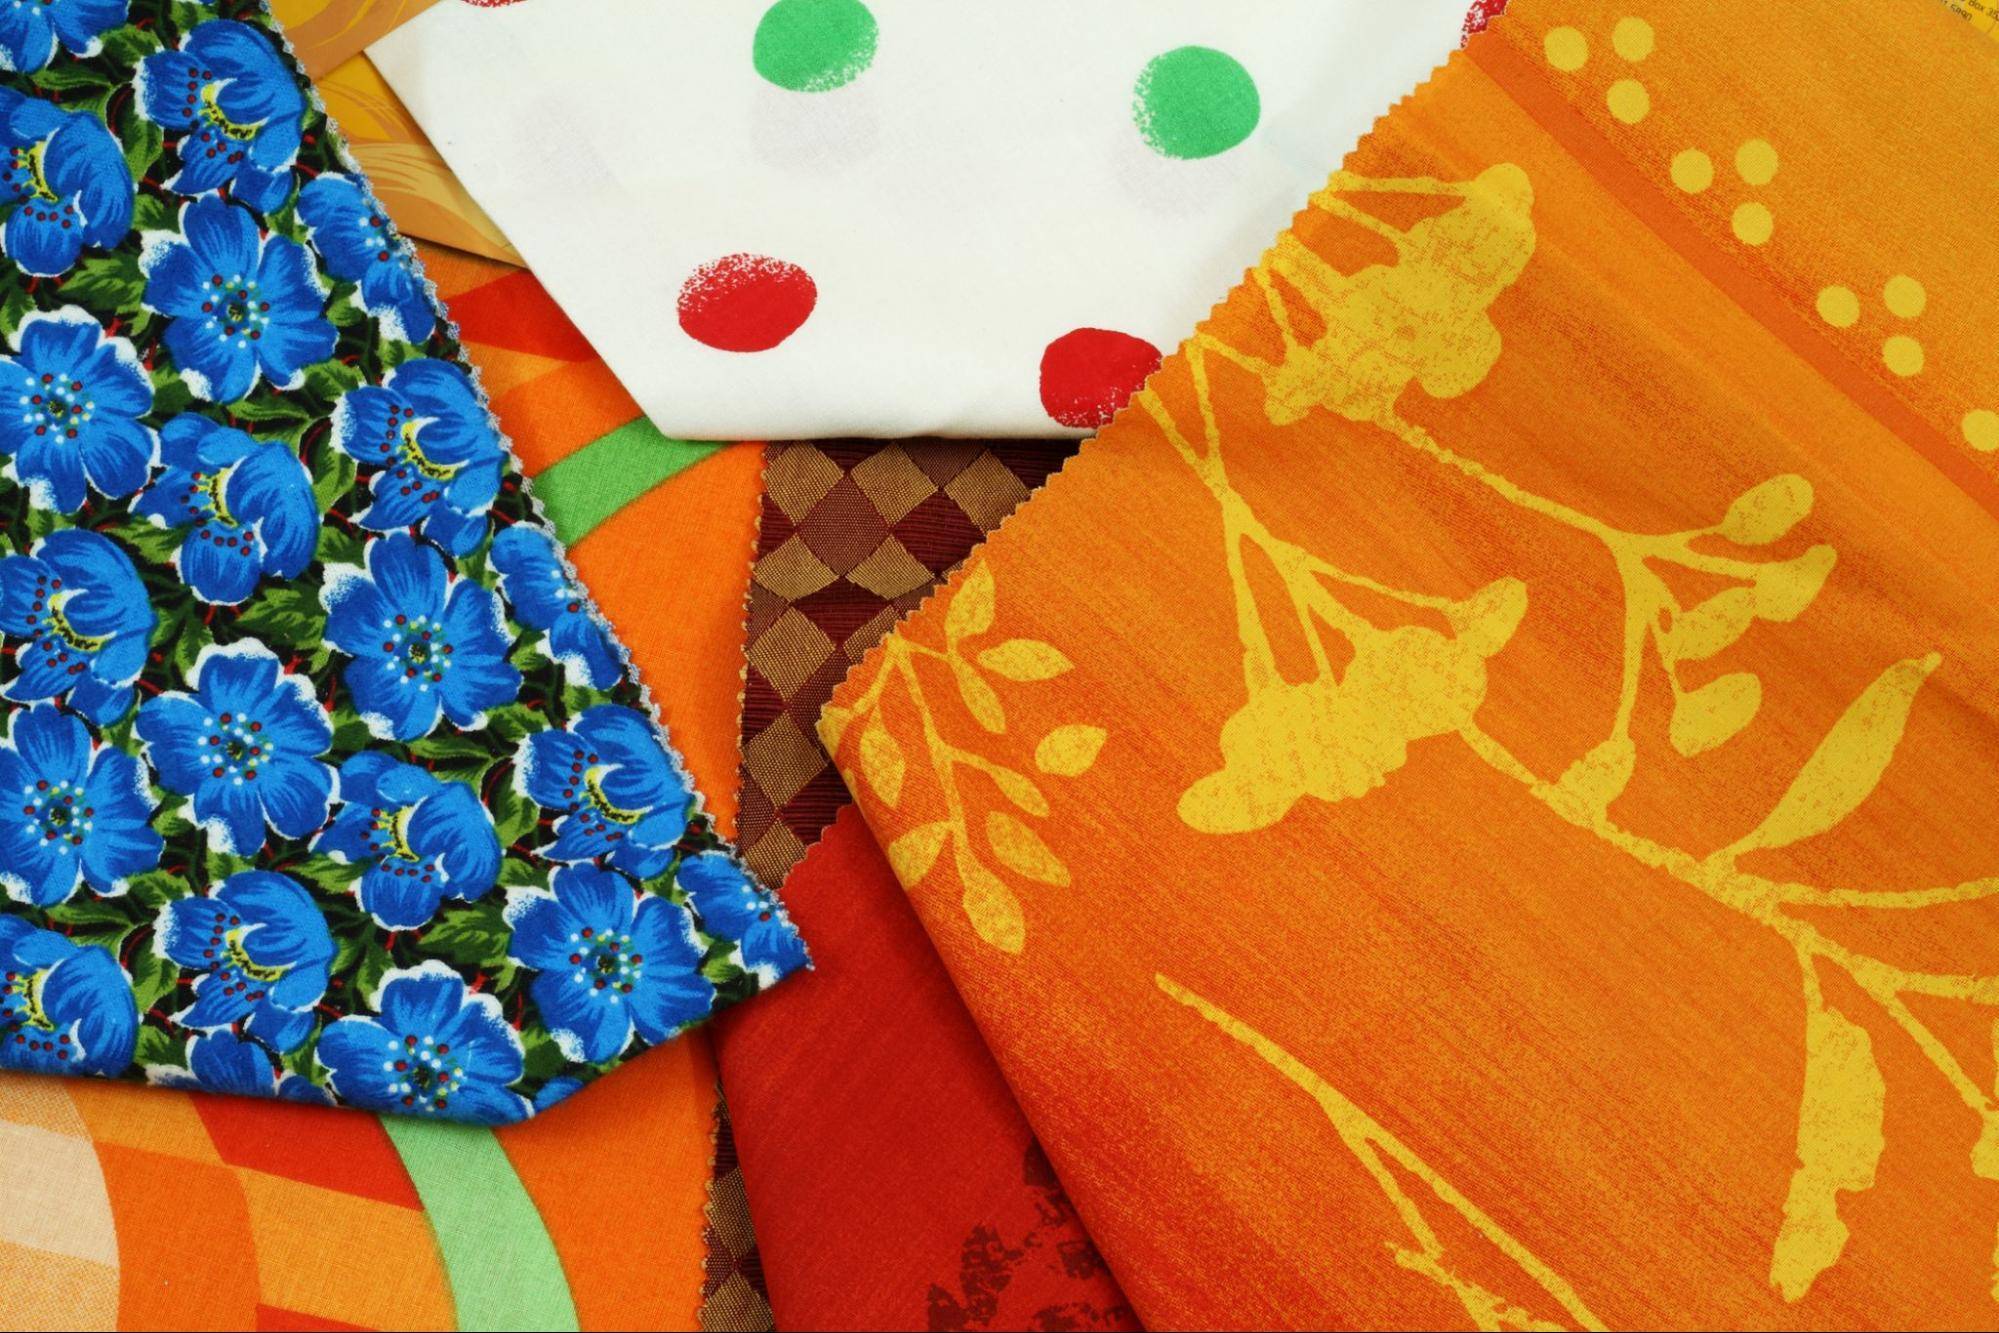 examples of printed textiles